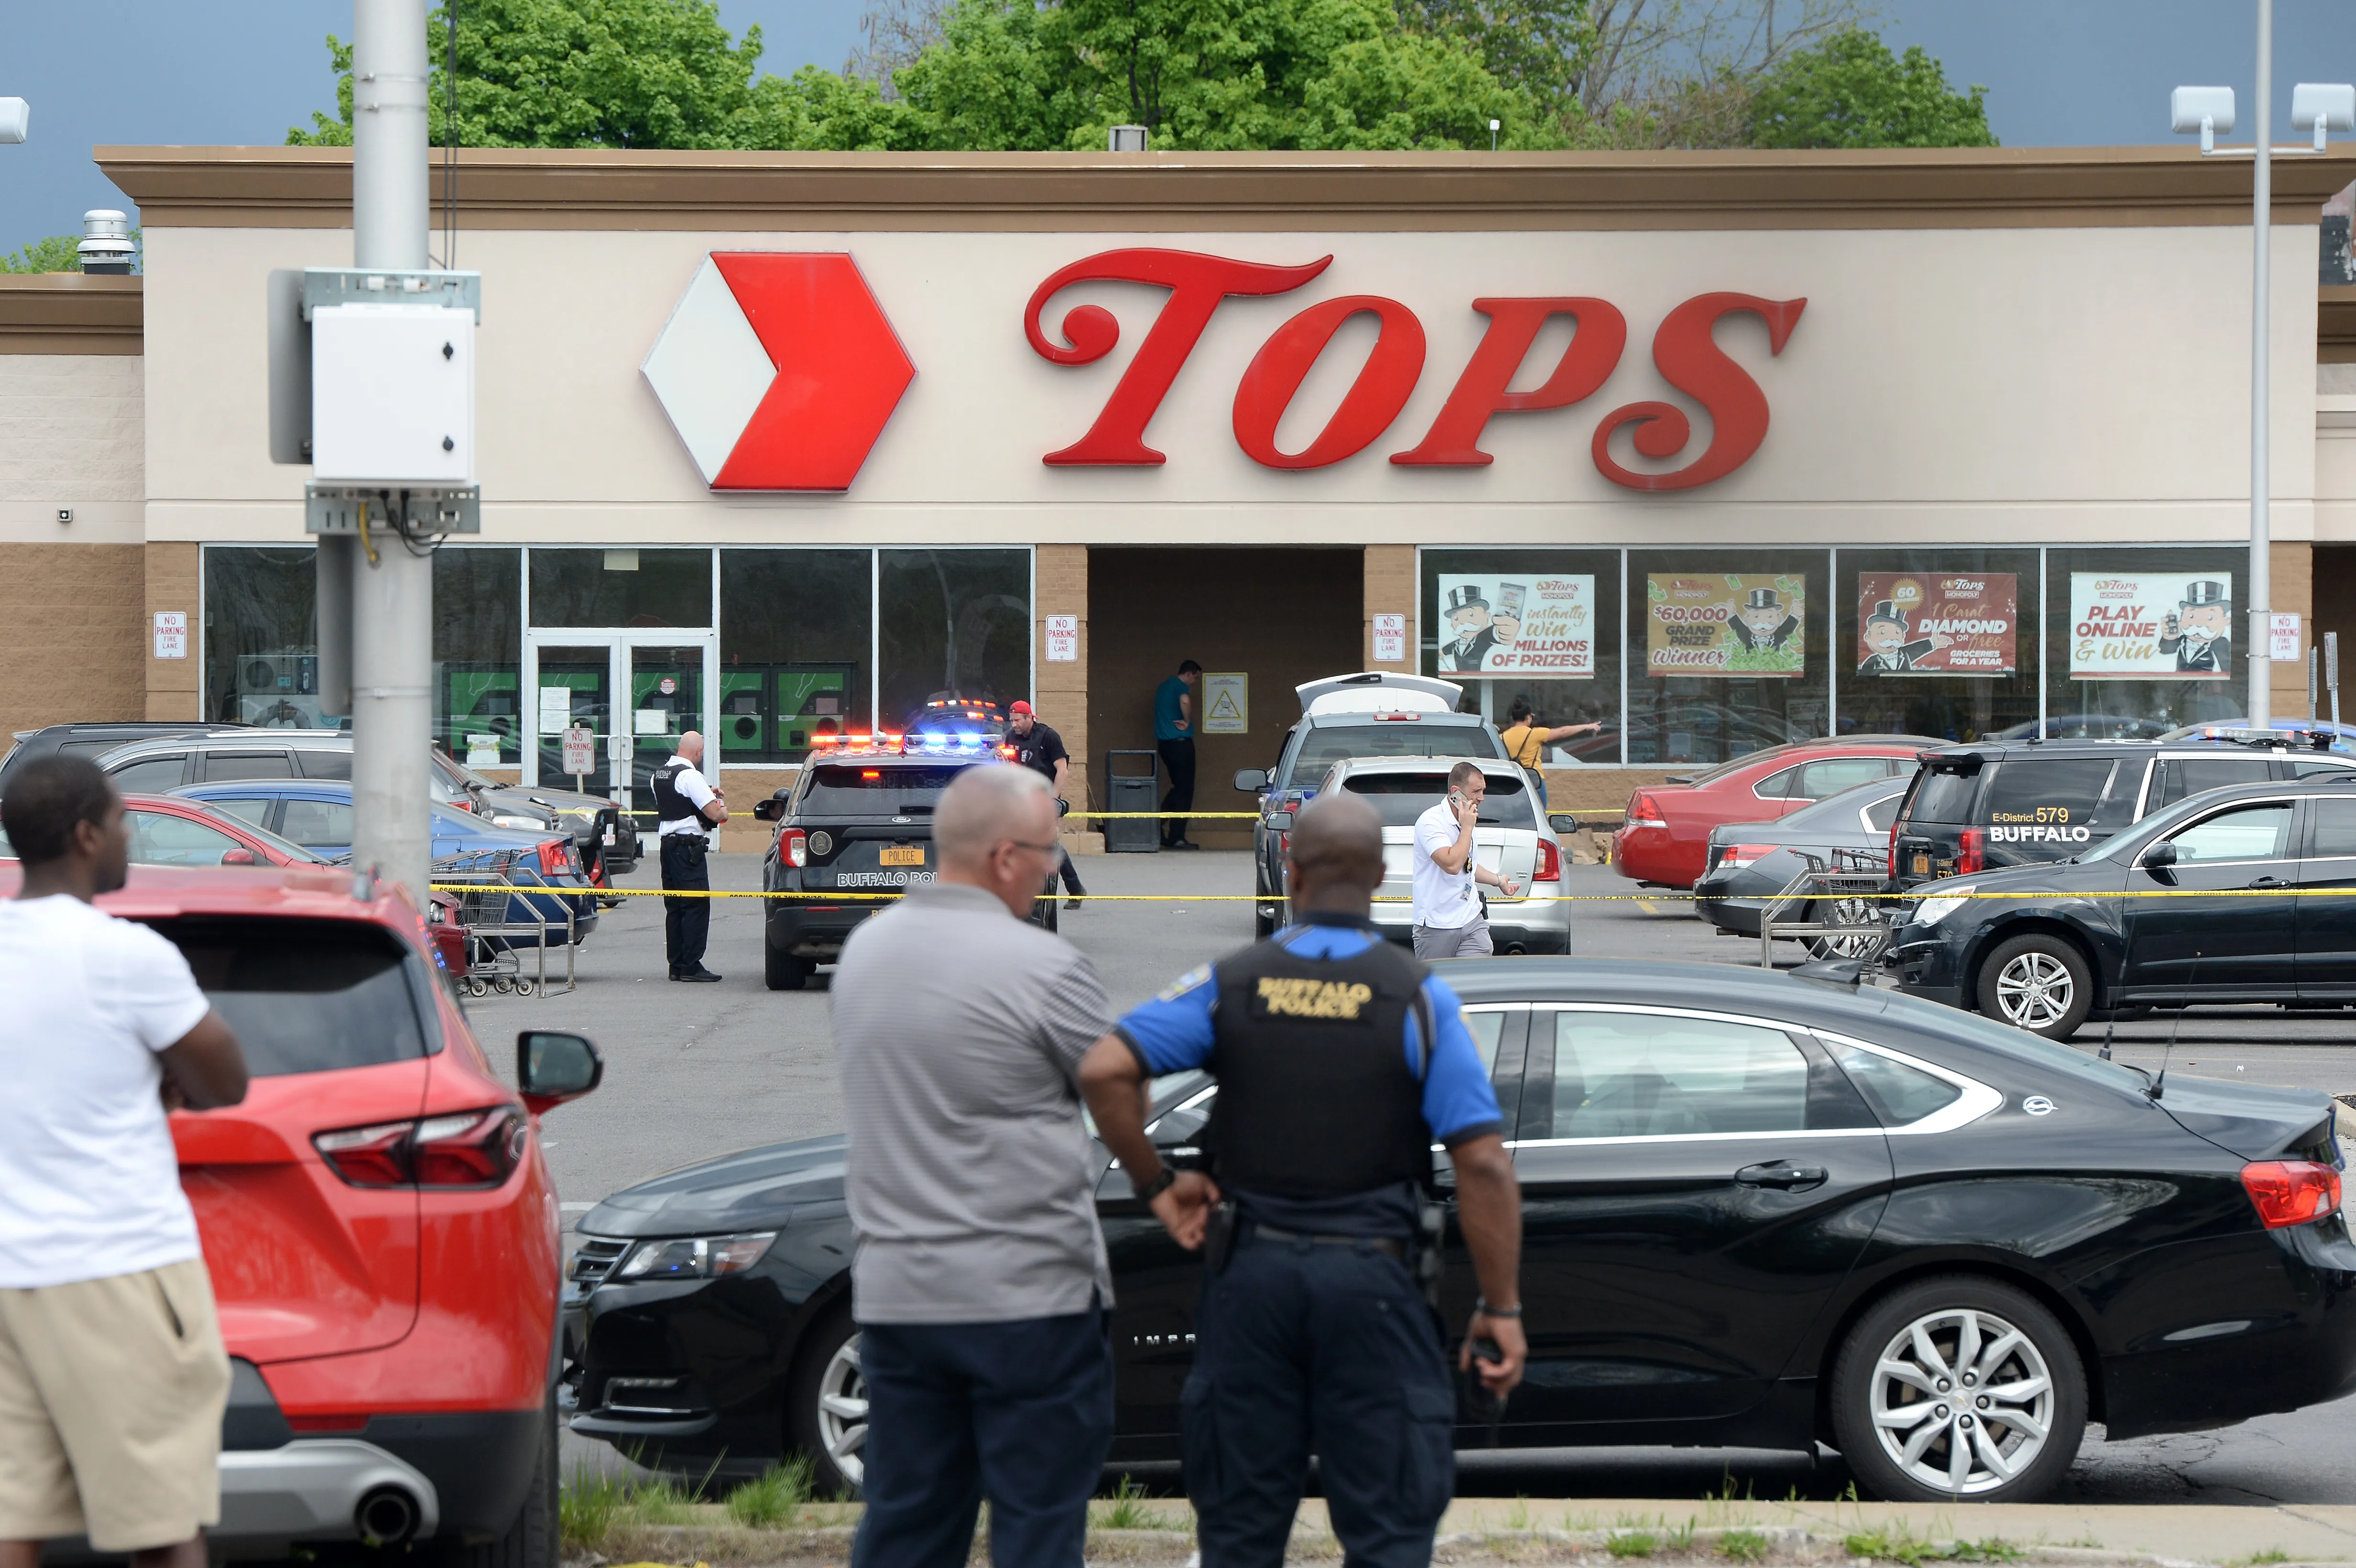 olice on scene at a Tops Friendly Market on May 14, 2022 in Buffalo, New York. According to reports, at least 10 people were killed after a mass shooting at the store with the shooter in police custody.?w=200&h=150